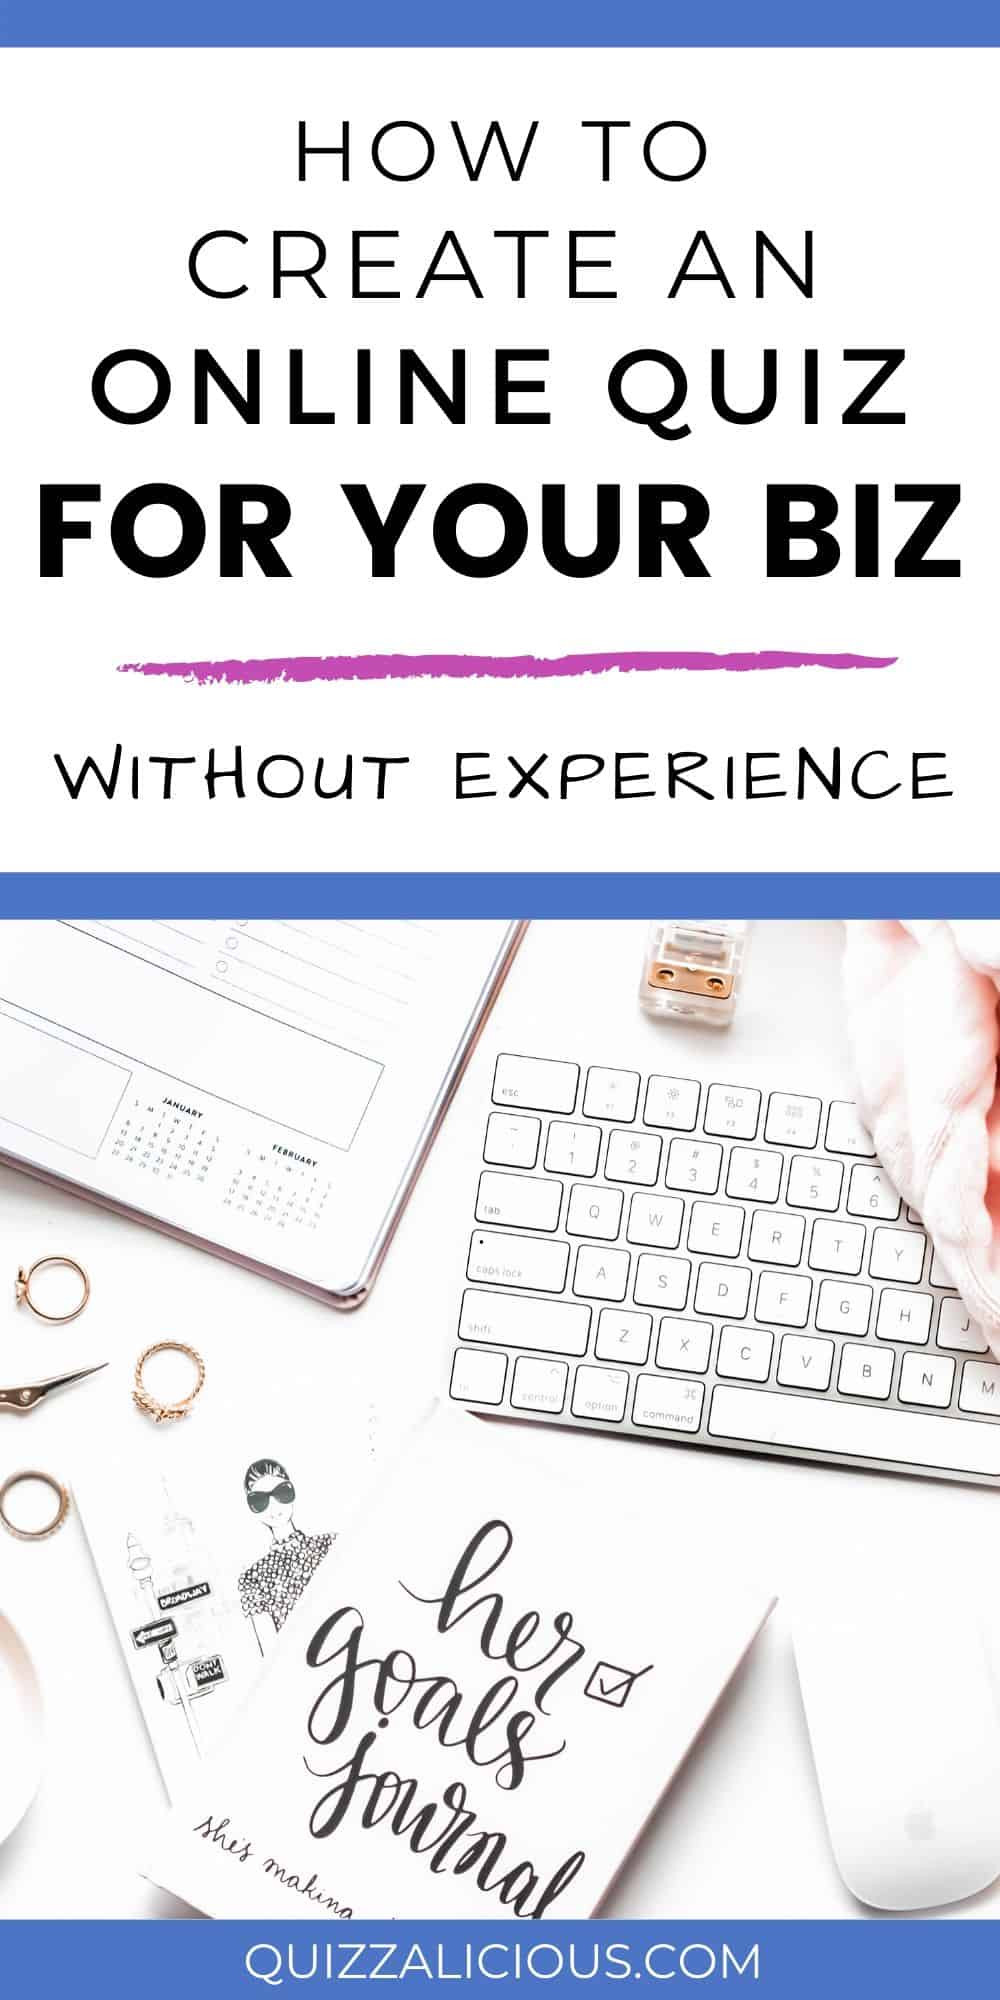 How to Create an Online Quiz for Your Biz | Without Experience